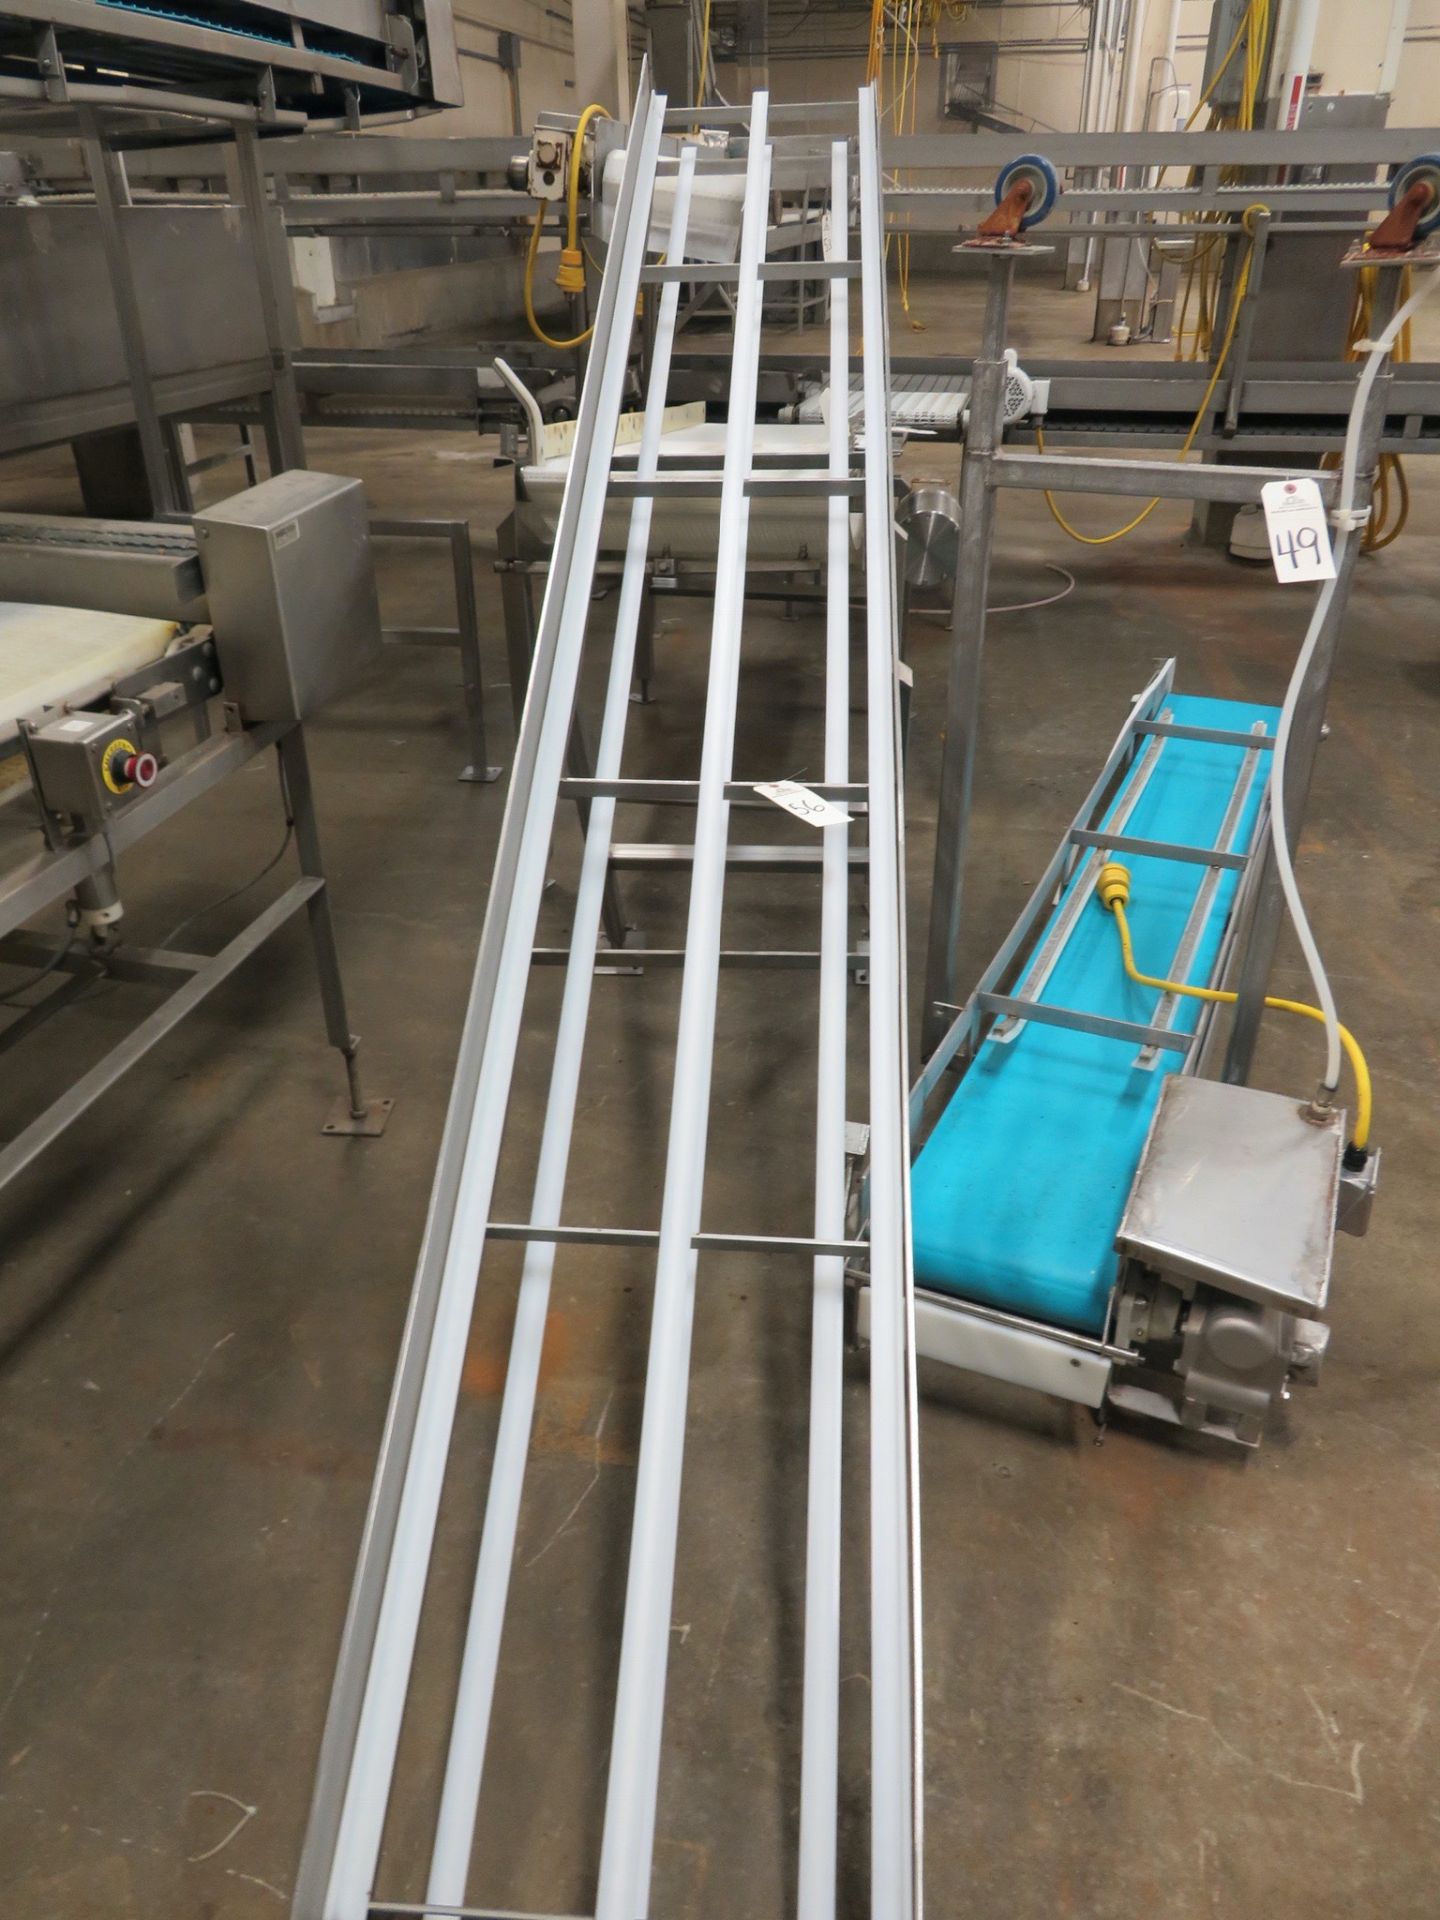 Stainless Steel Conveyor, 18"W x 10'L | Rigging Fee: $150